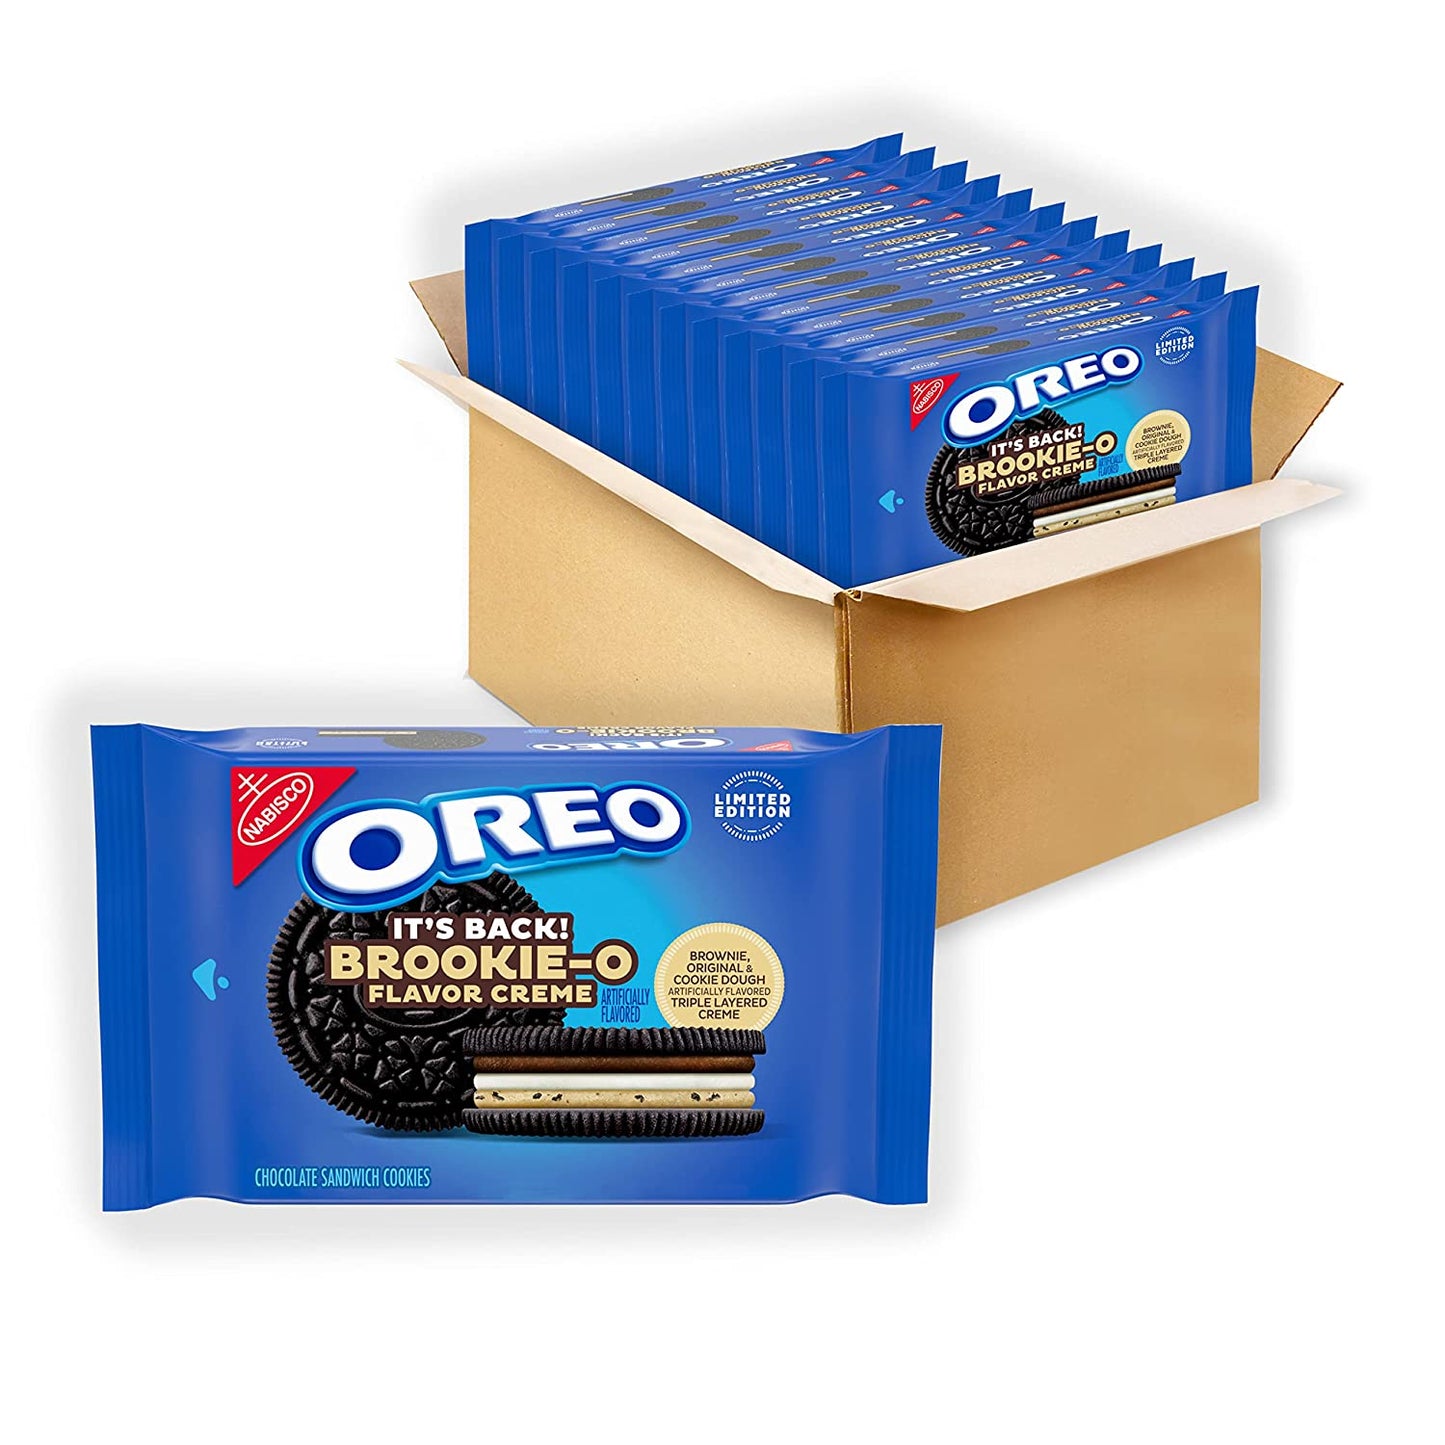 OREO Brookie-O Brownie, Original & Cookie Dough Creme Chocolate Sandwich Cookies, Limited Edition, 13.2 oz - SOLD OUT OOS